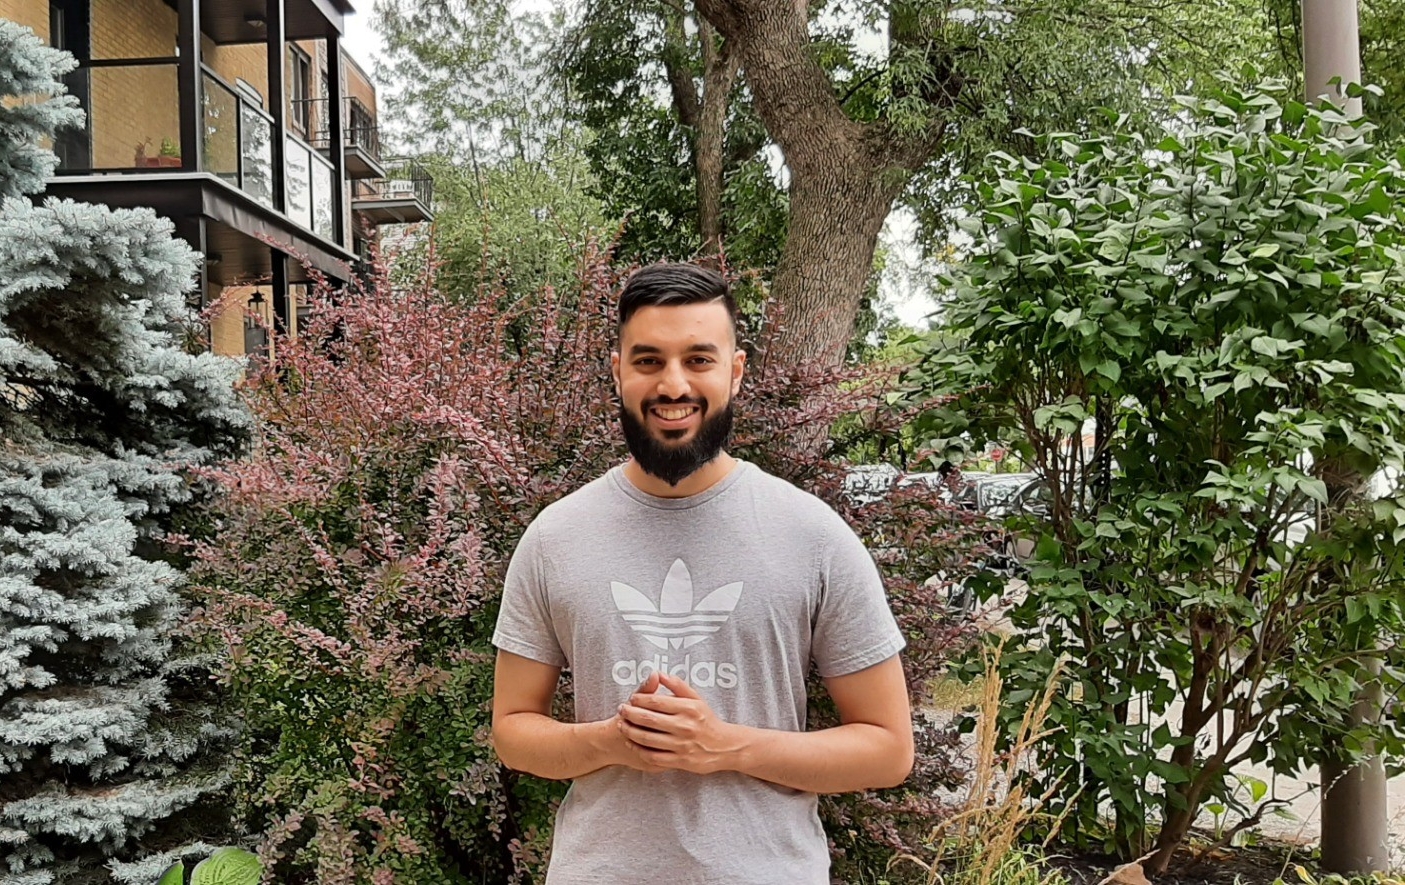 Nabeel Chaumun stands on a lawn in front of trees